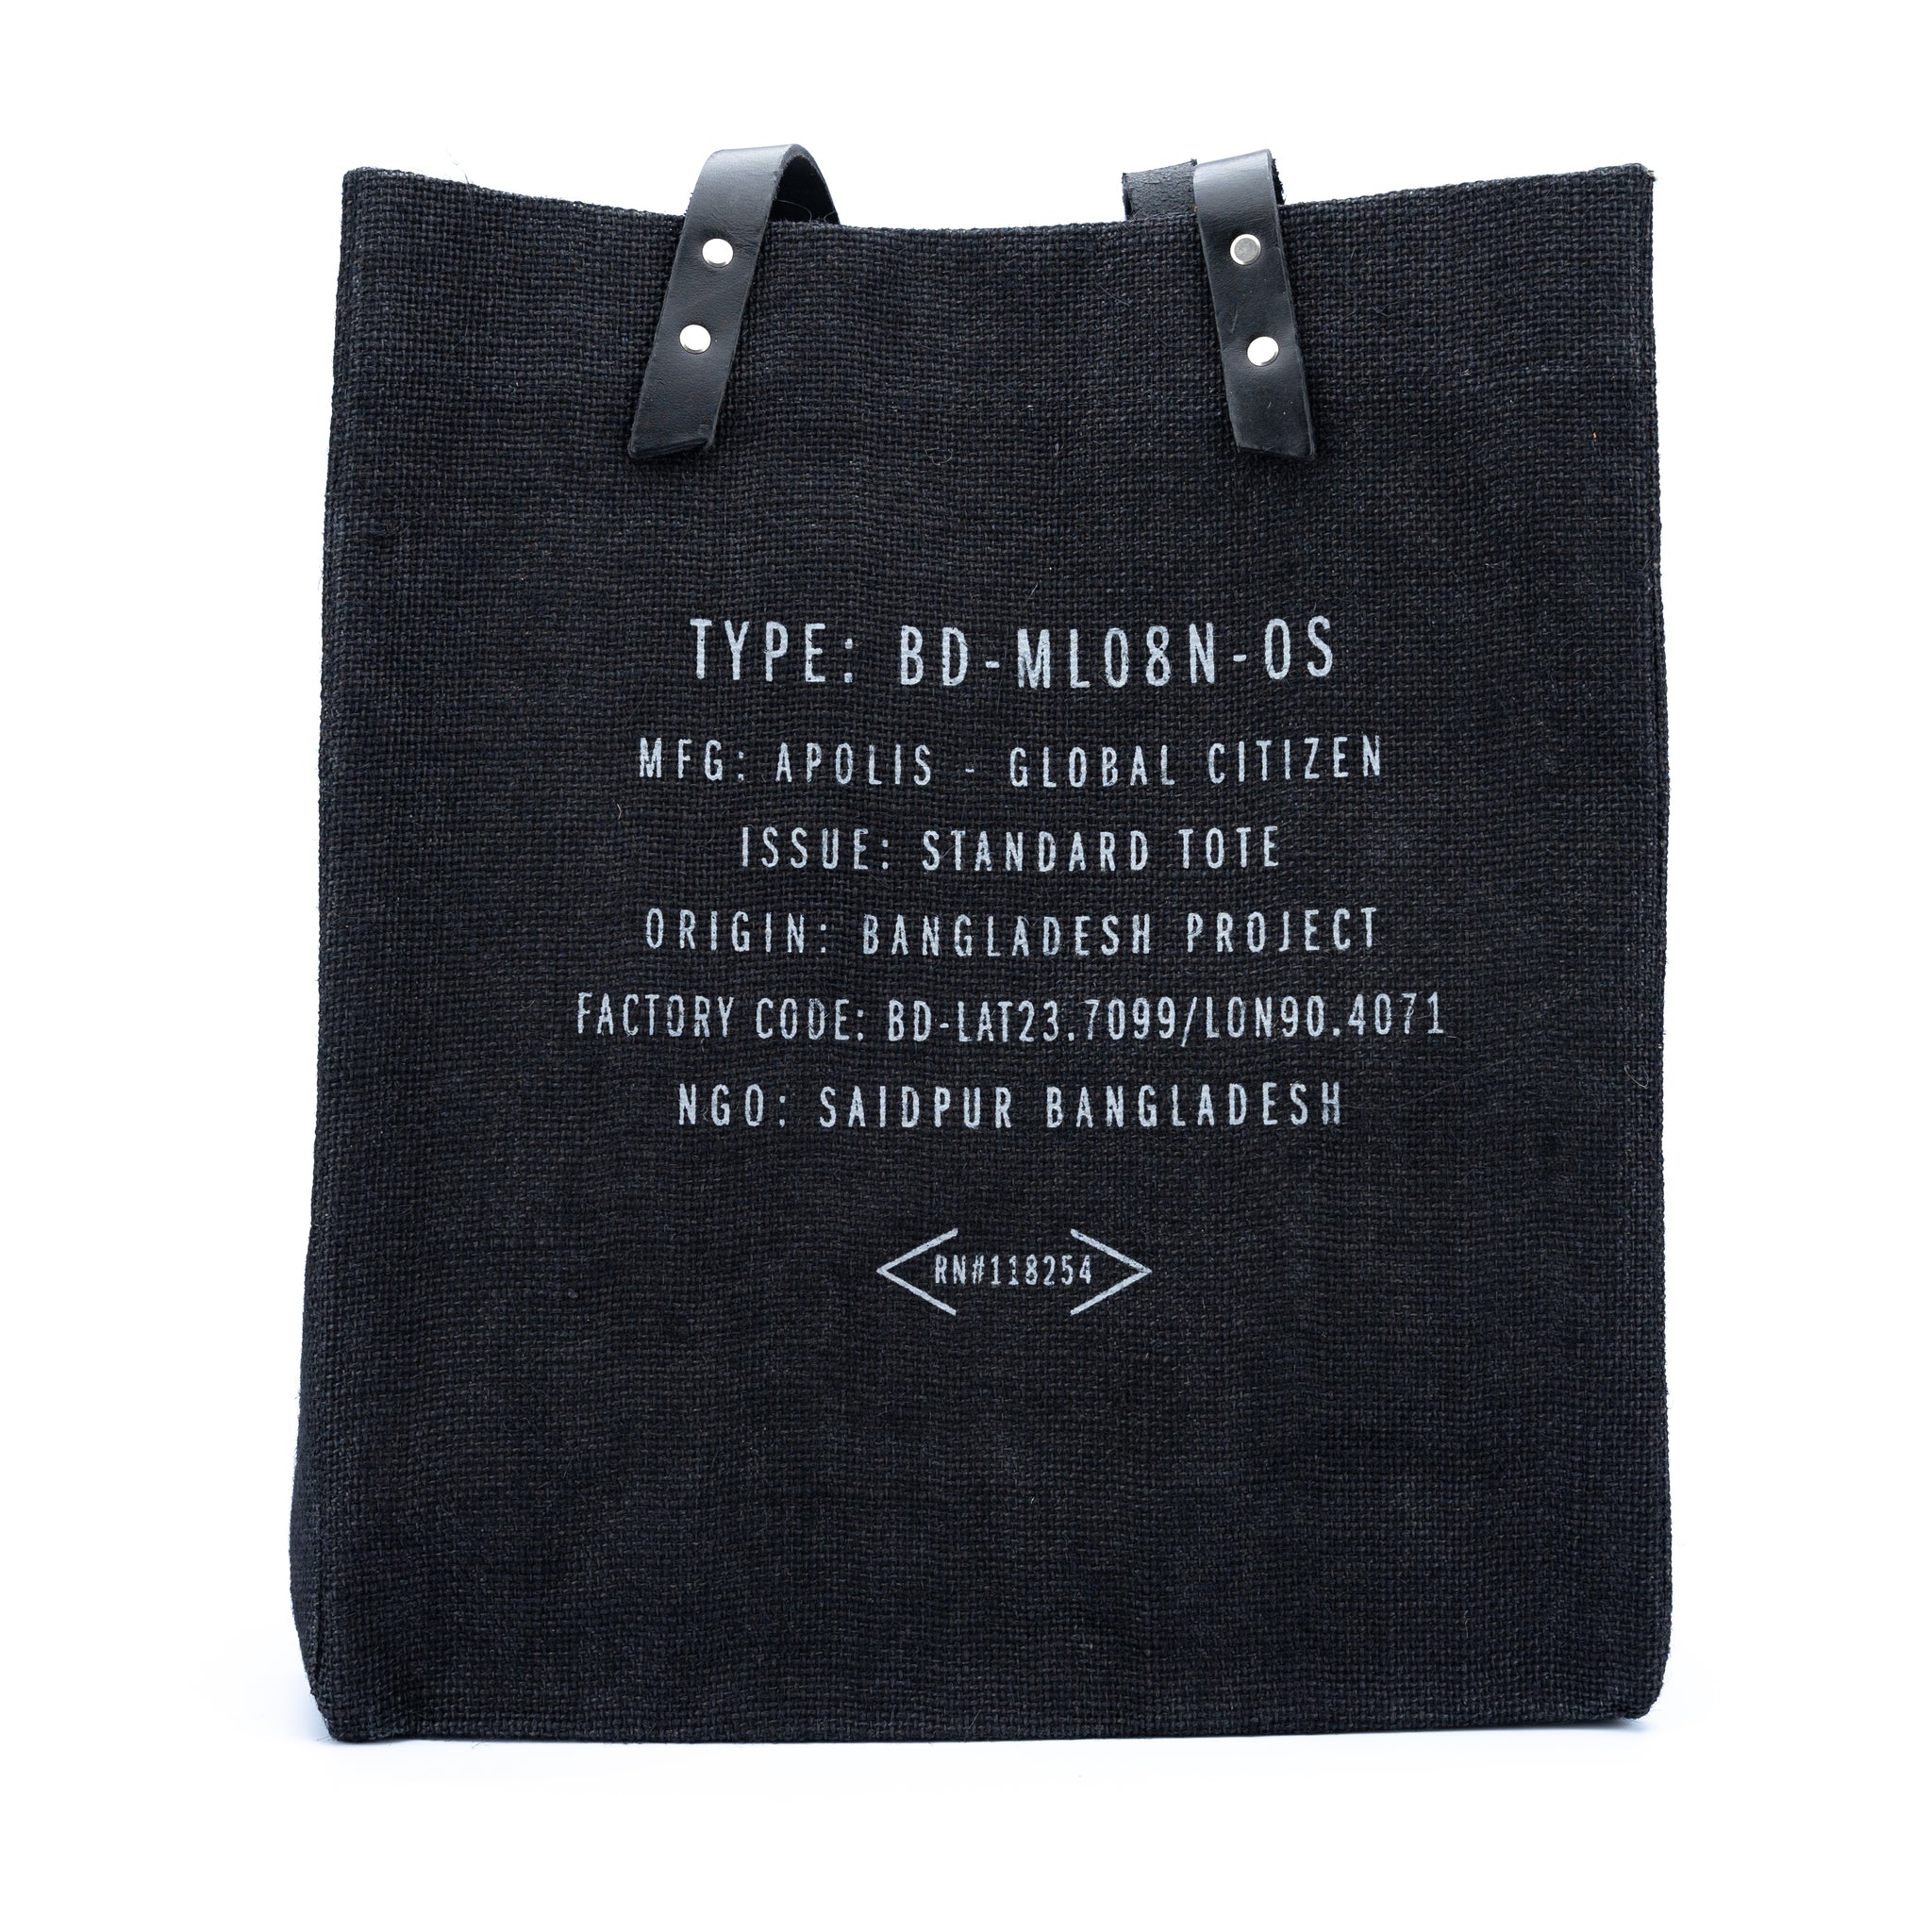 Back of Benedetta Tote Bad made by Apolis Global Citizen